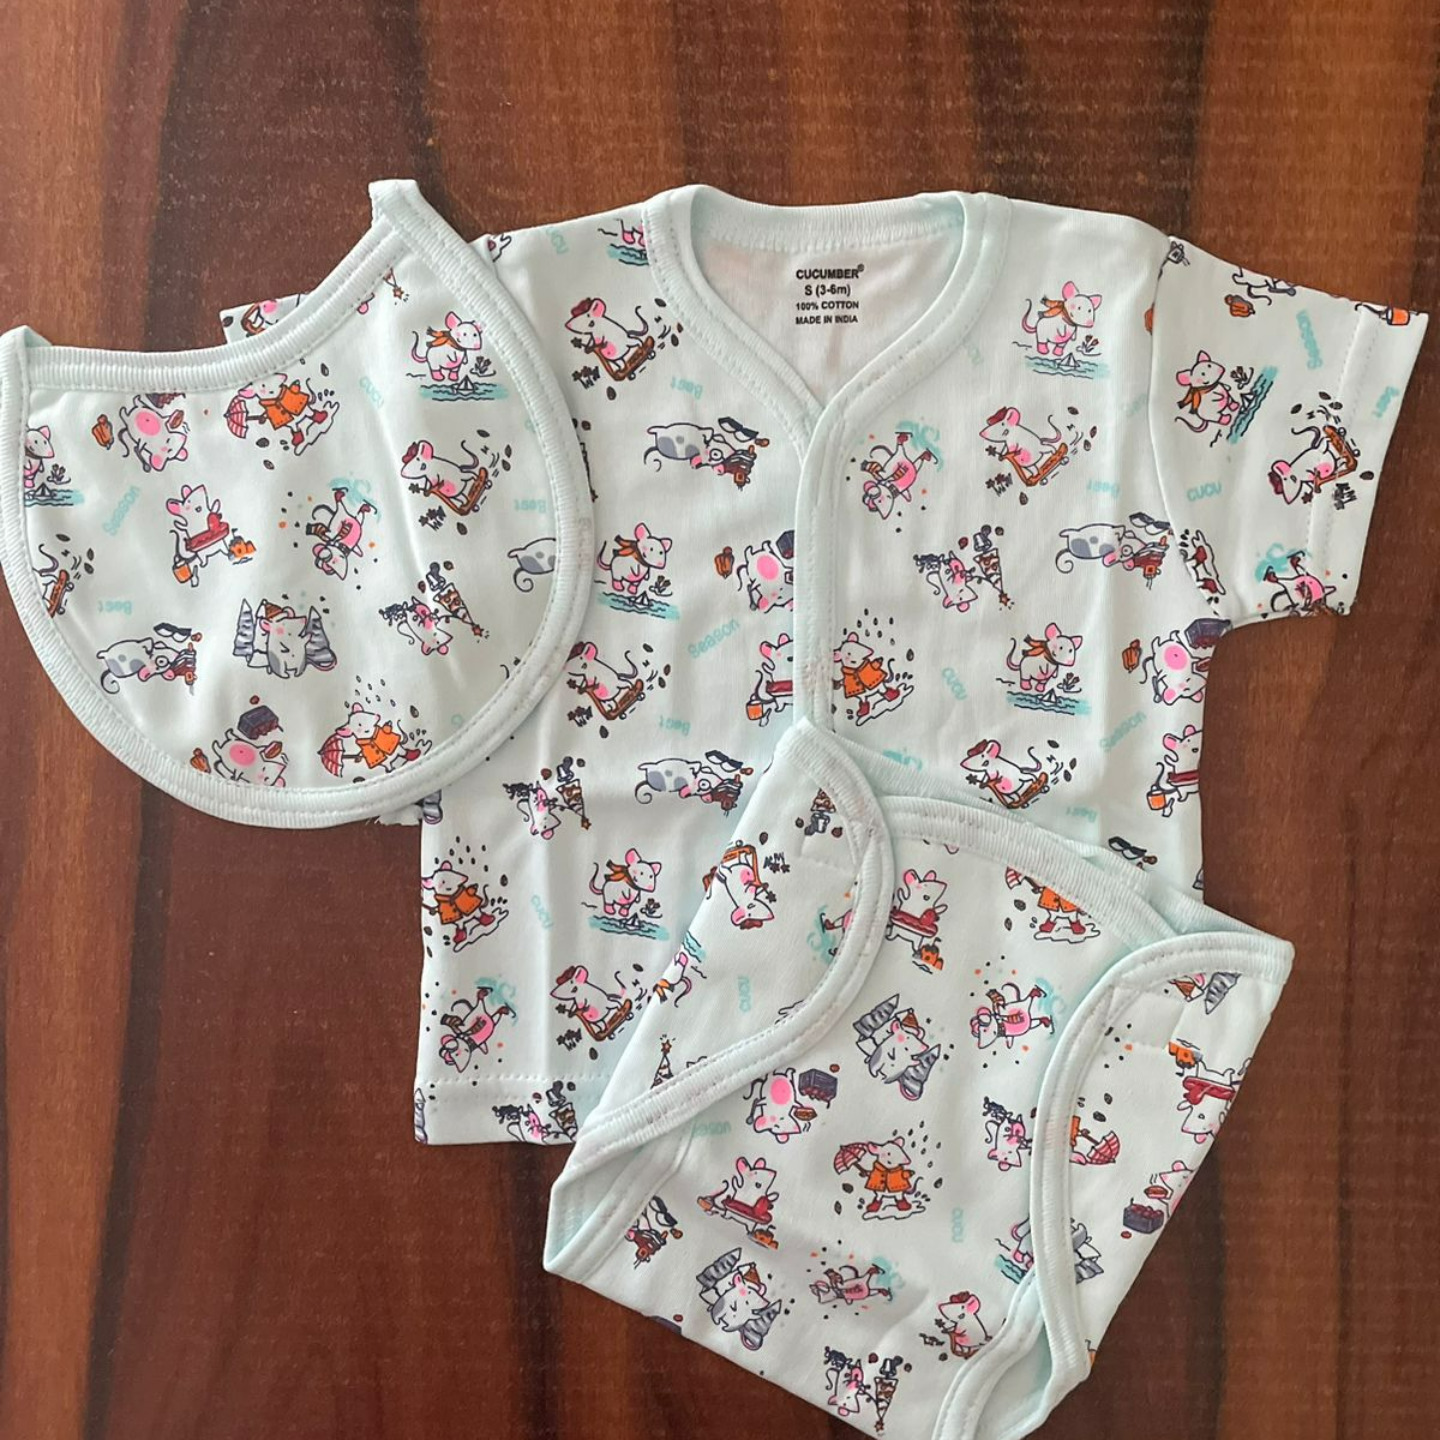 Cucumber Front Open Set Rs 270 Only 0-6 Months Newborn Baby